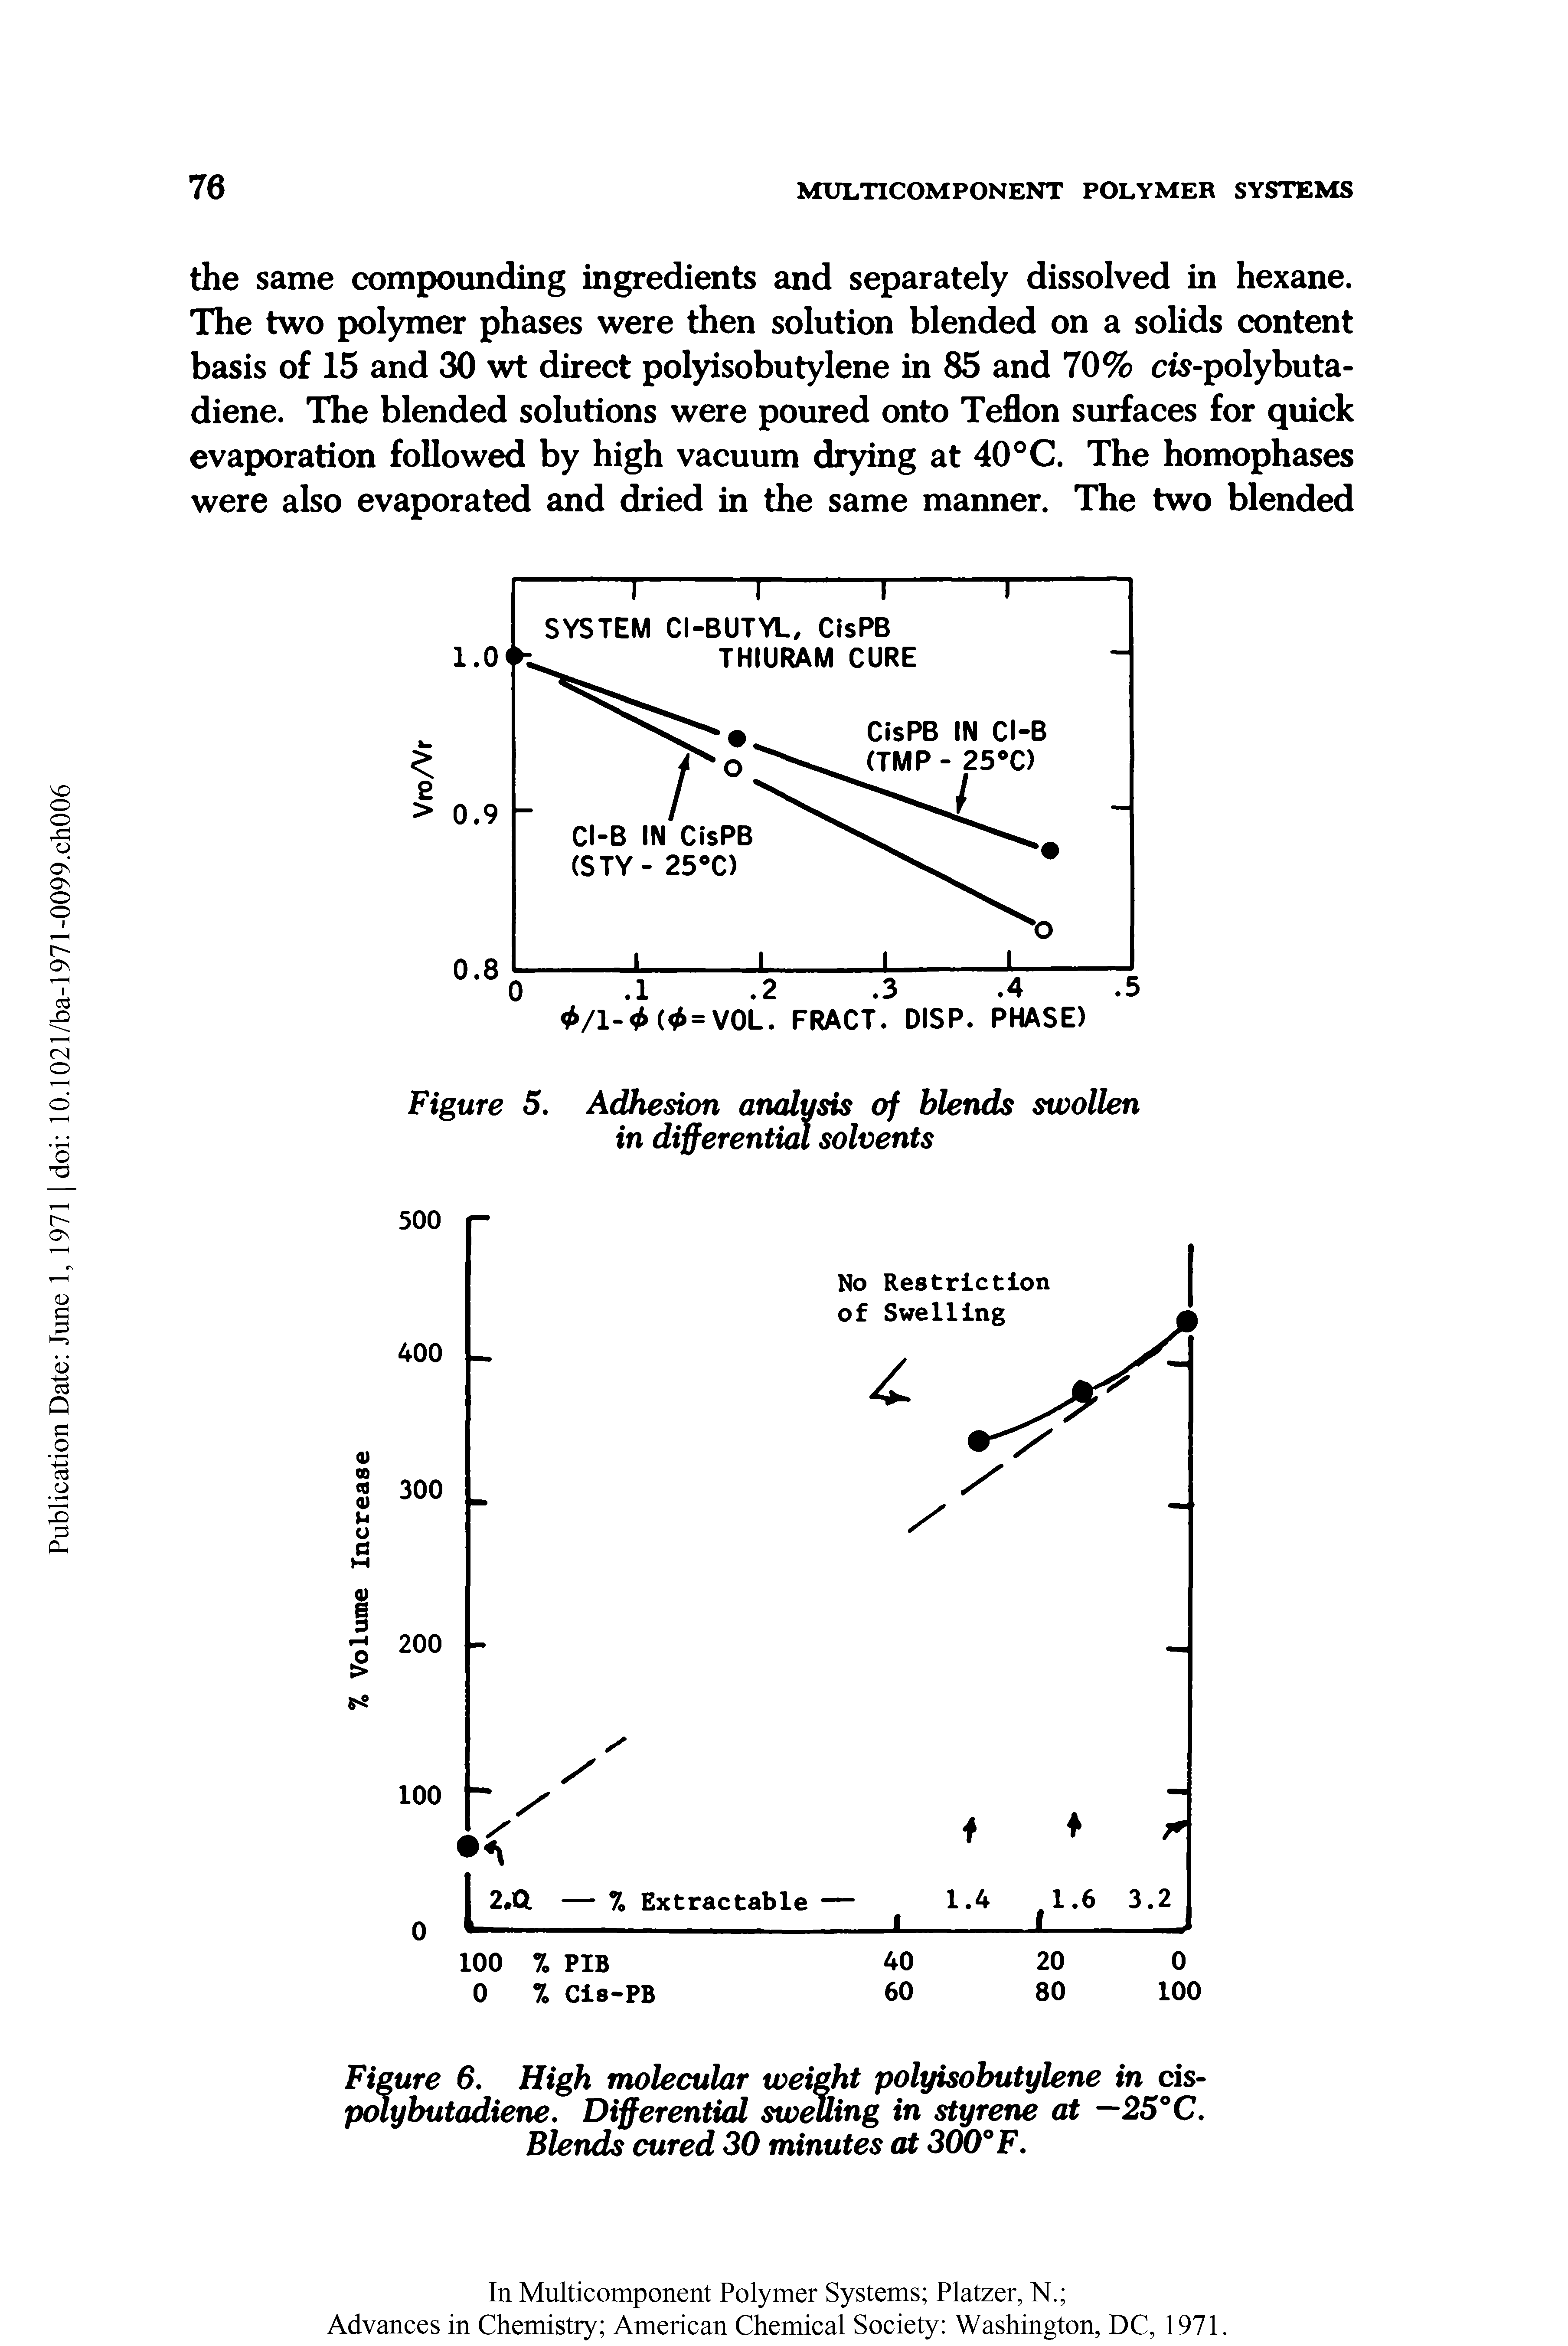 Figure 6. High molecular weight polyisobutylene in cis-poly butadiene. Differential swelling in styrene at —25°C. Blends cured 30 minutes at 300° F.